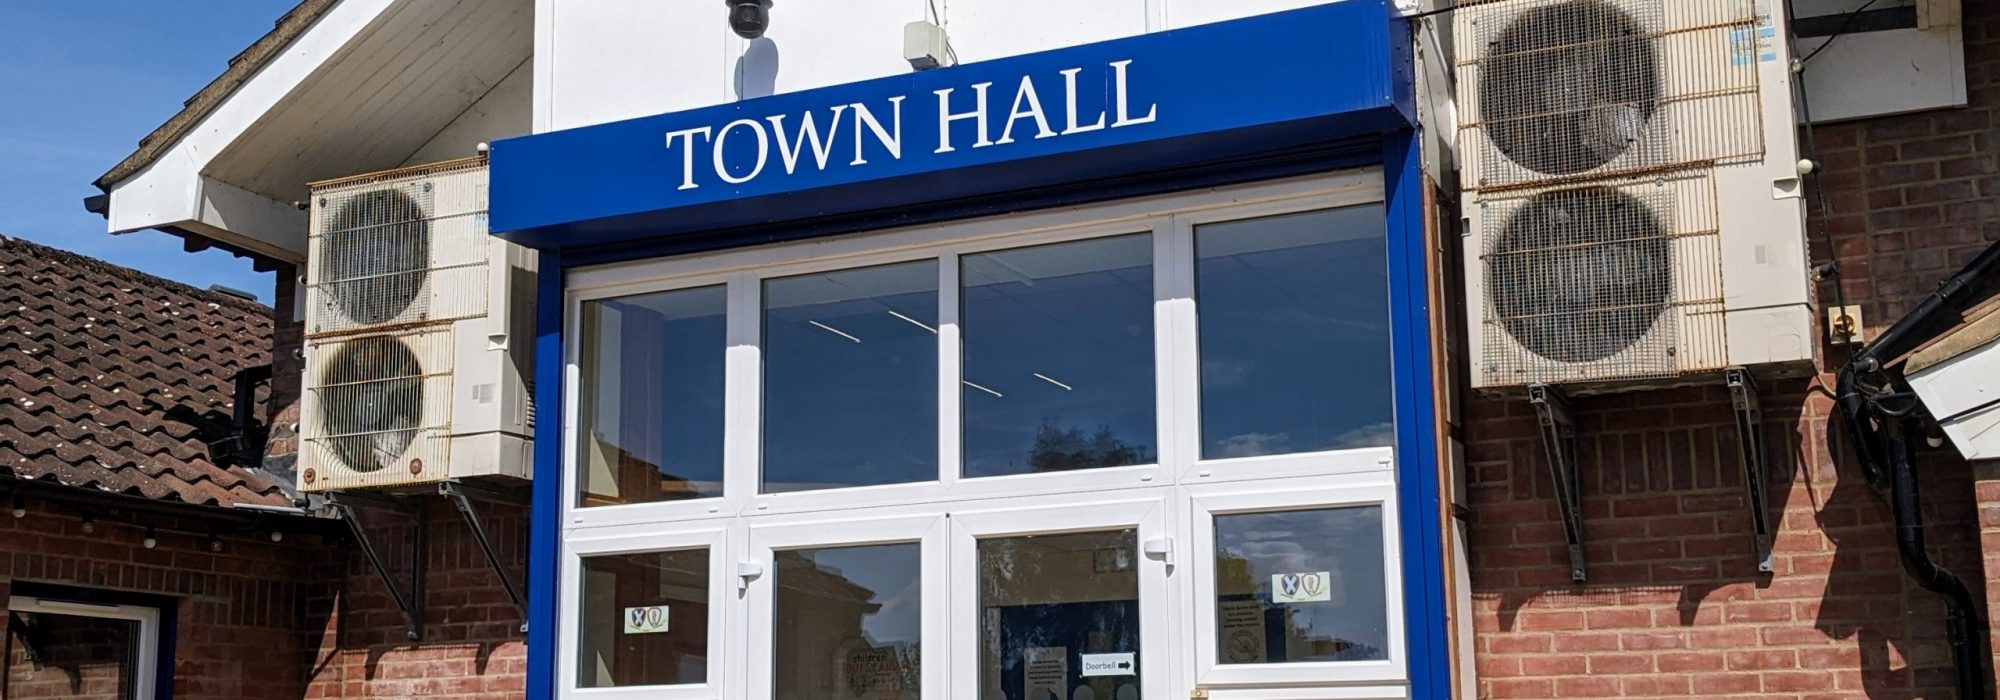 TownHall